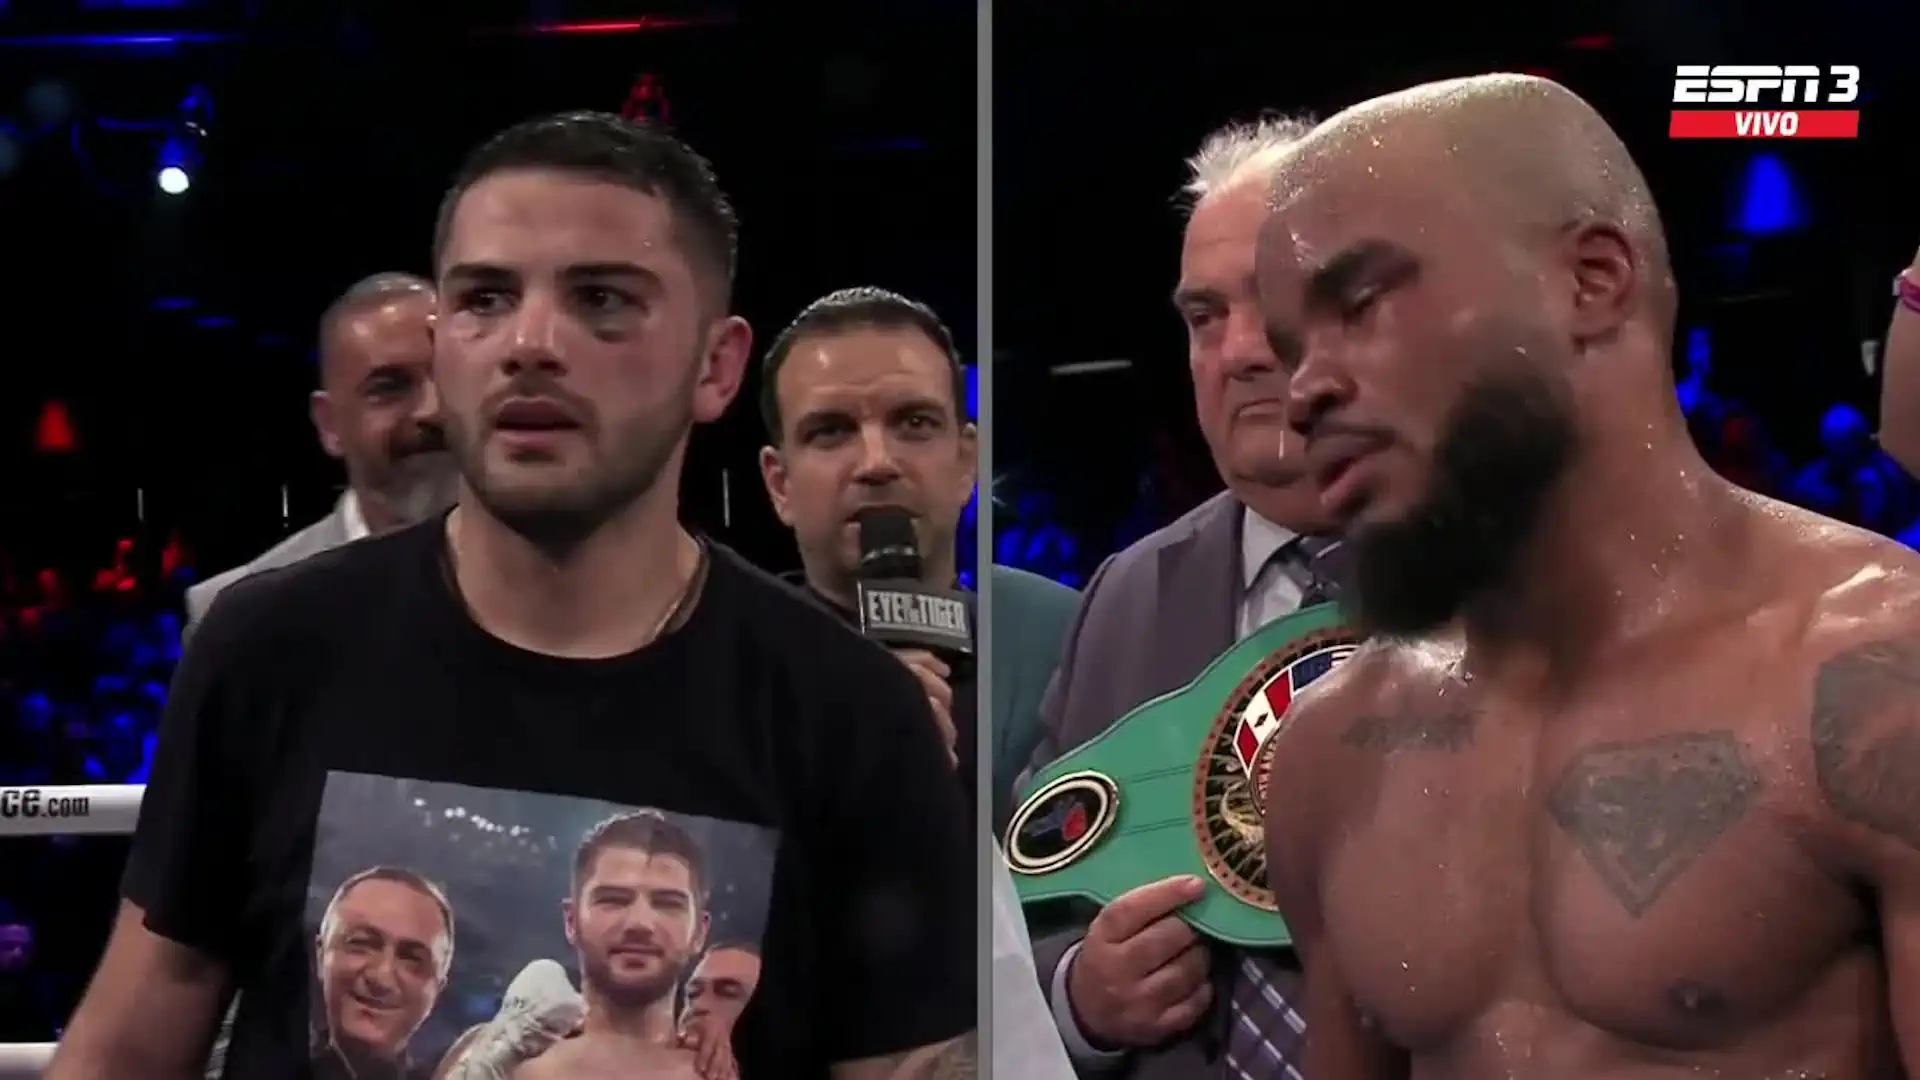 Erik Bazinyan and Shaquille Phinn made a super fight (video and result of the fight)